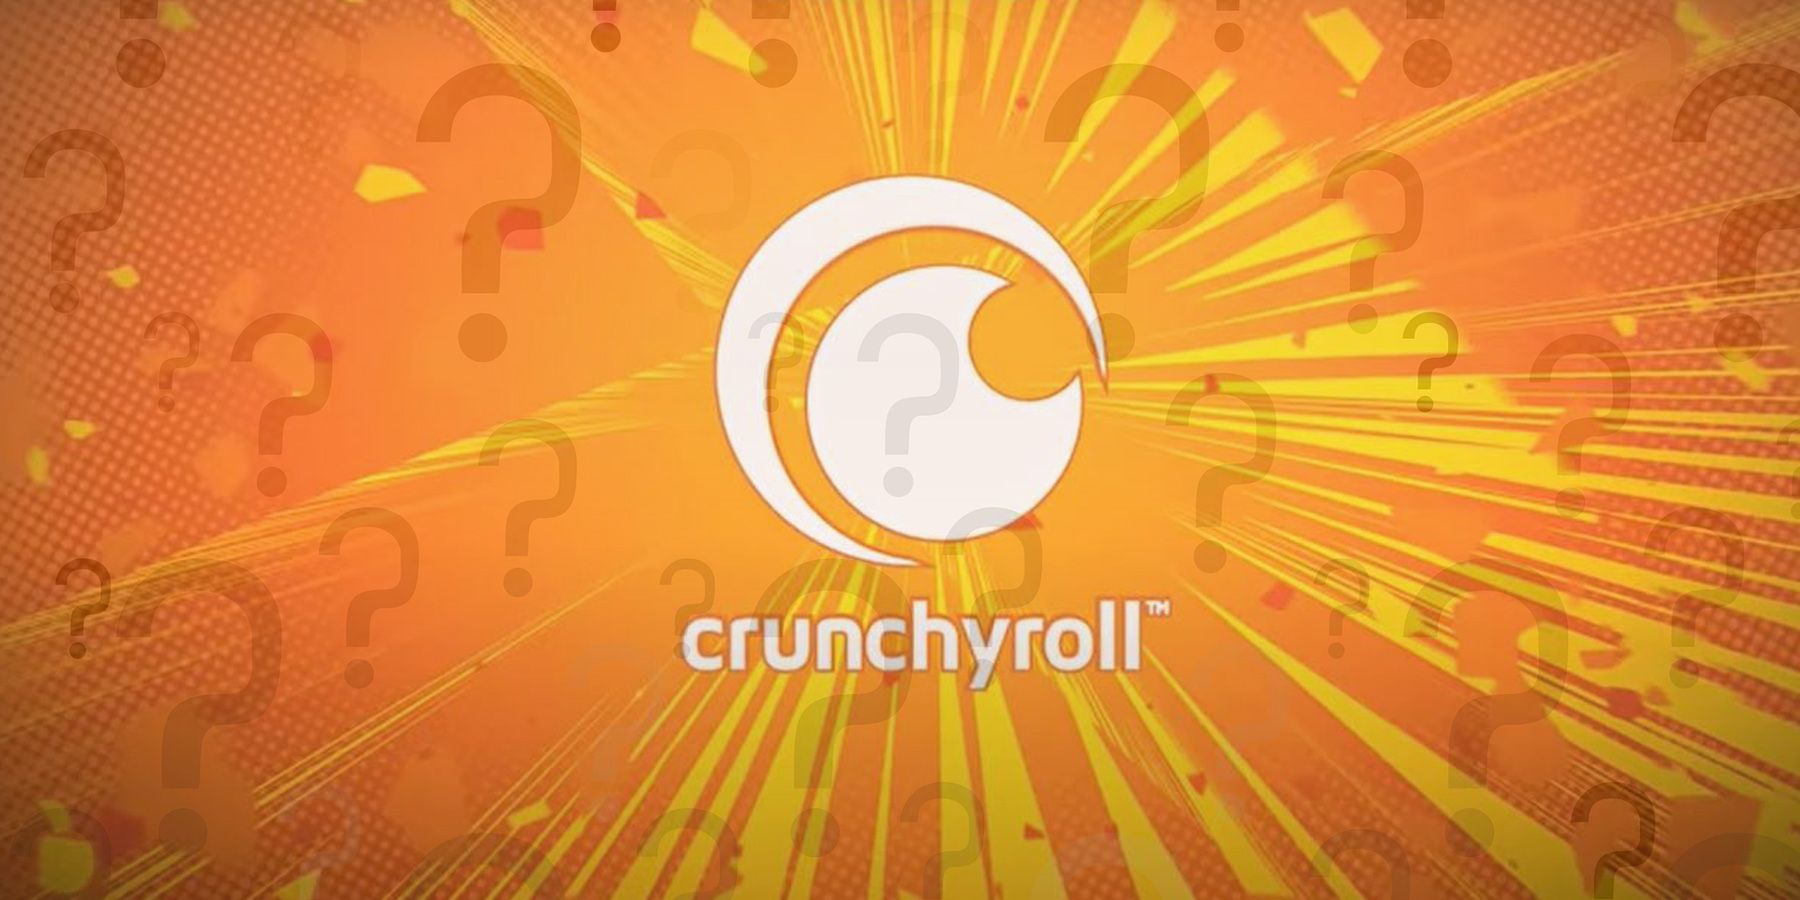 Sony's Deal for Anime Platform Crunchyroll Faces Uncertainty (Report)